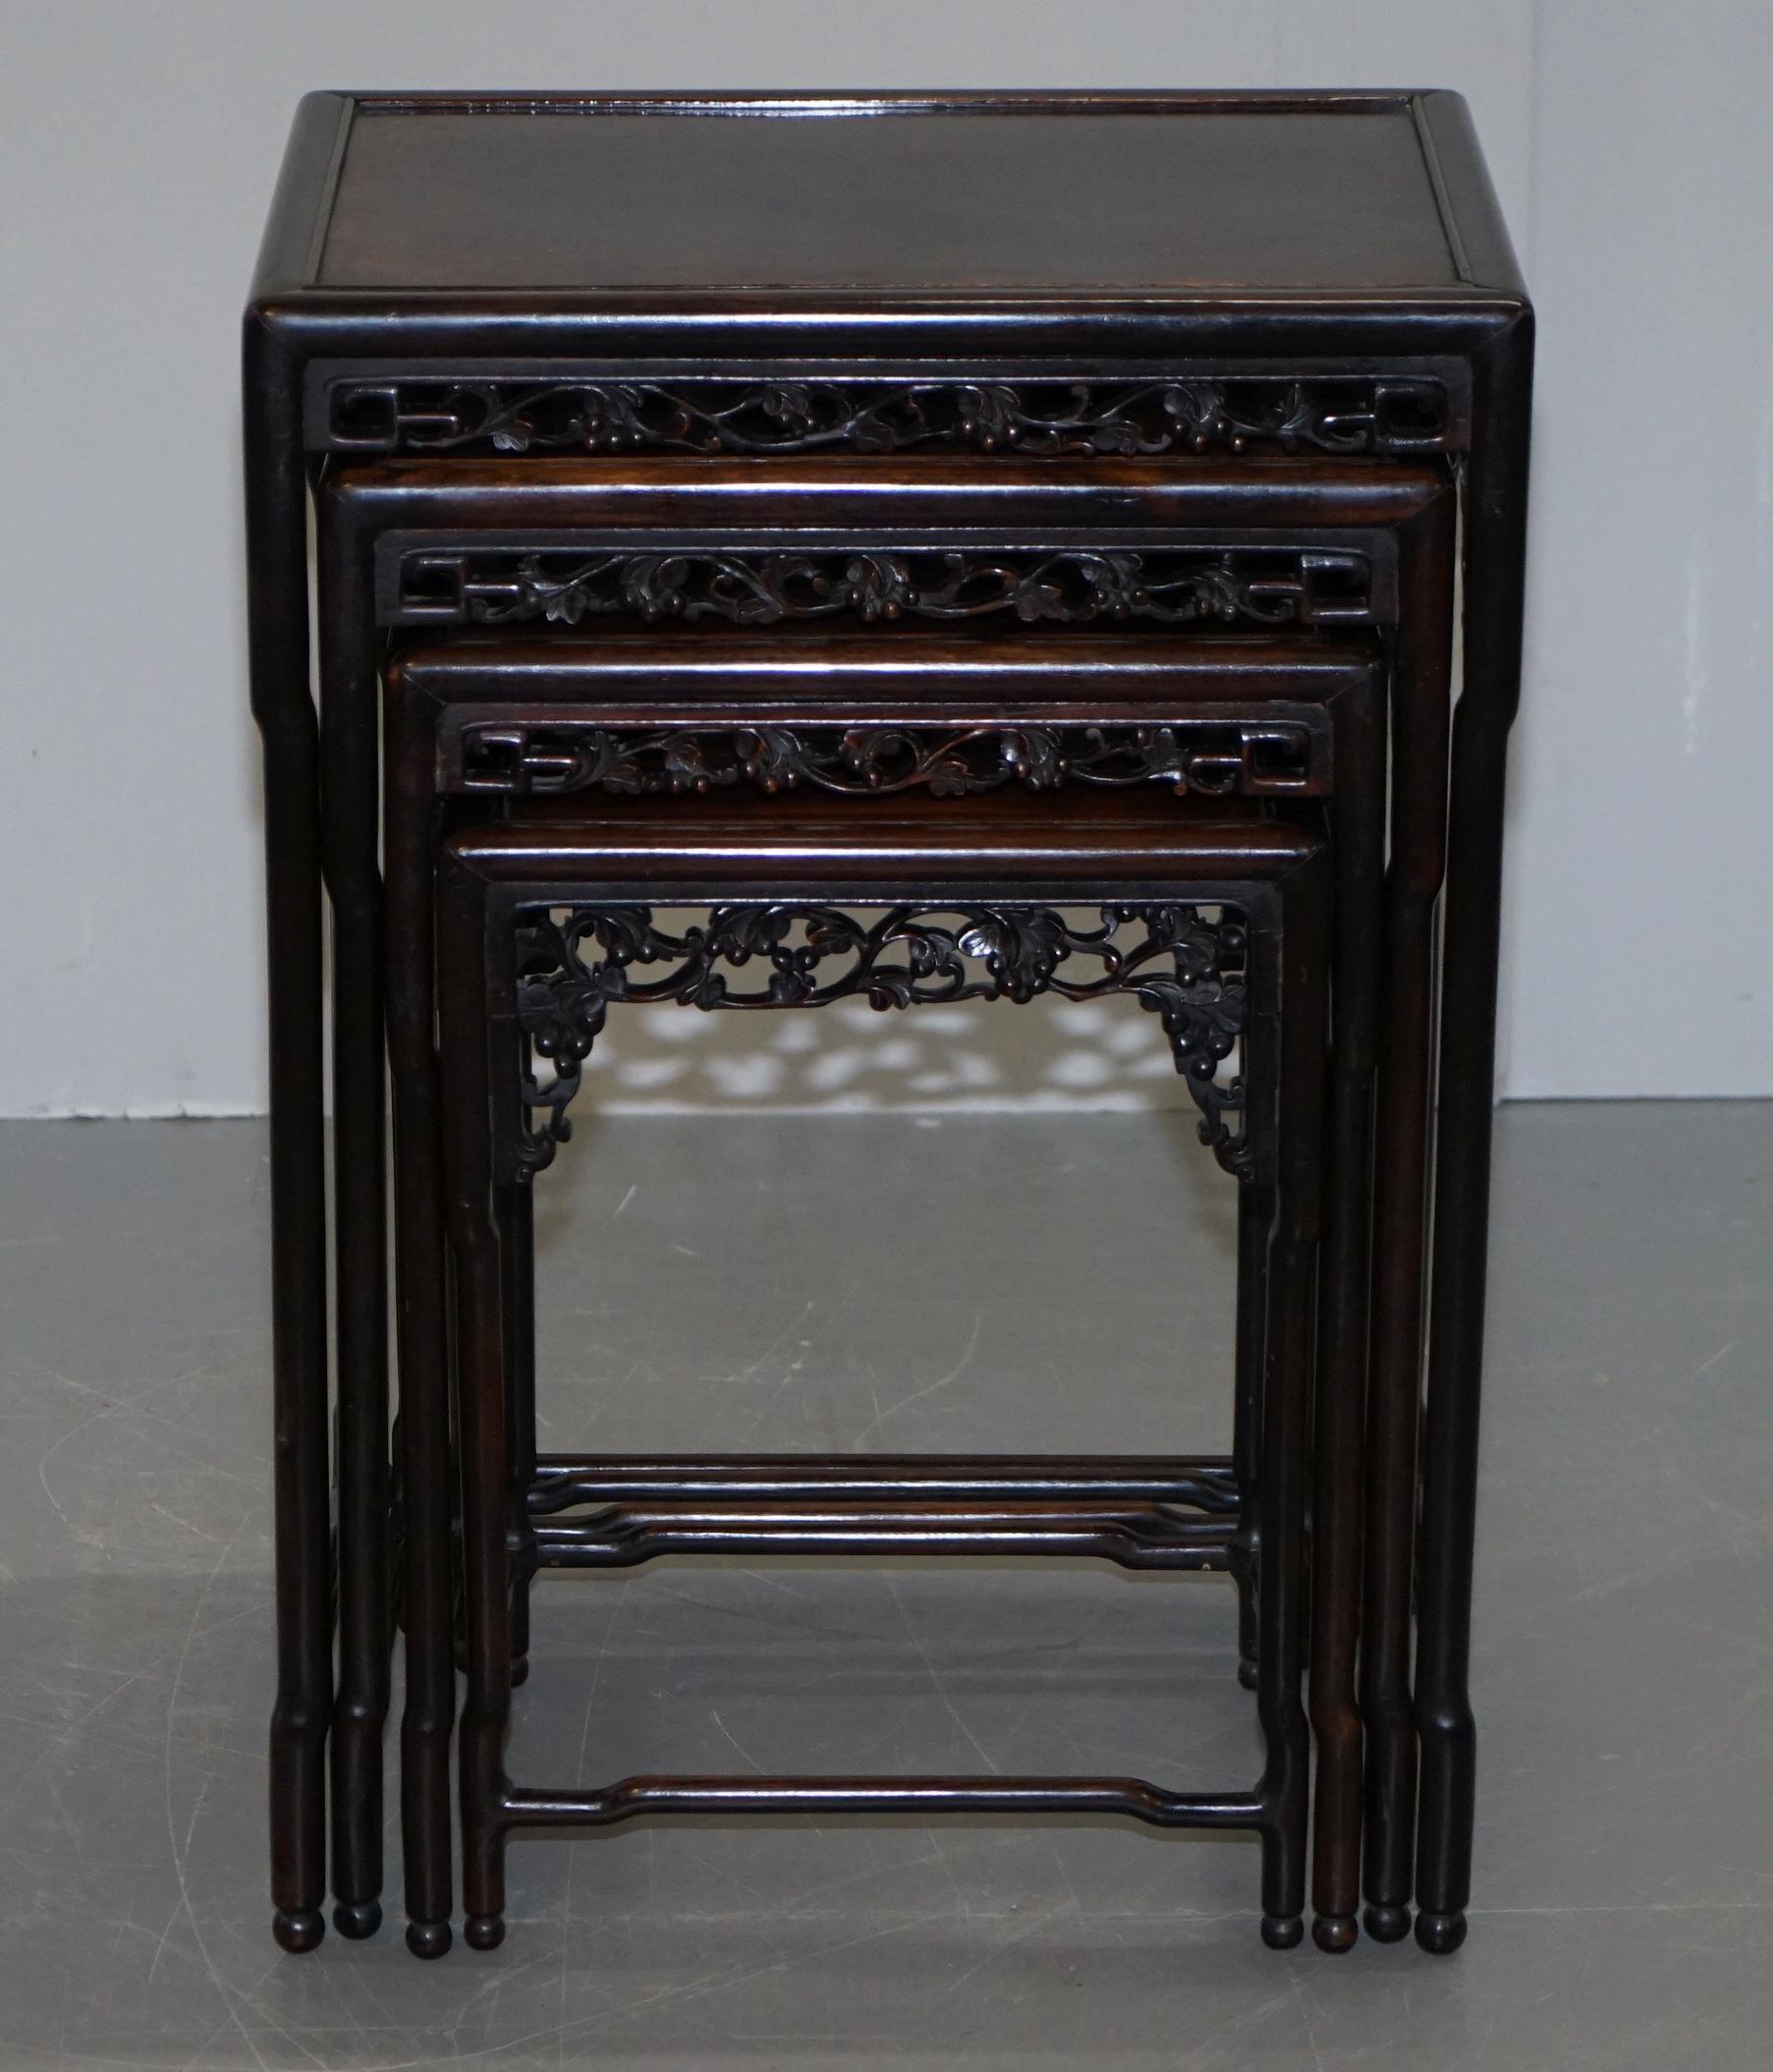 We are delighted to offer for sale this sublime 19th century hardwood nest of four heavily carved tables

A quintessentially Classic Chinese export piece, made for the British market during the late Victorian era when we were fascinated with the